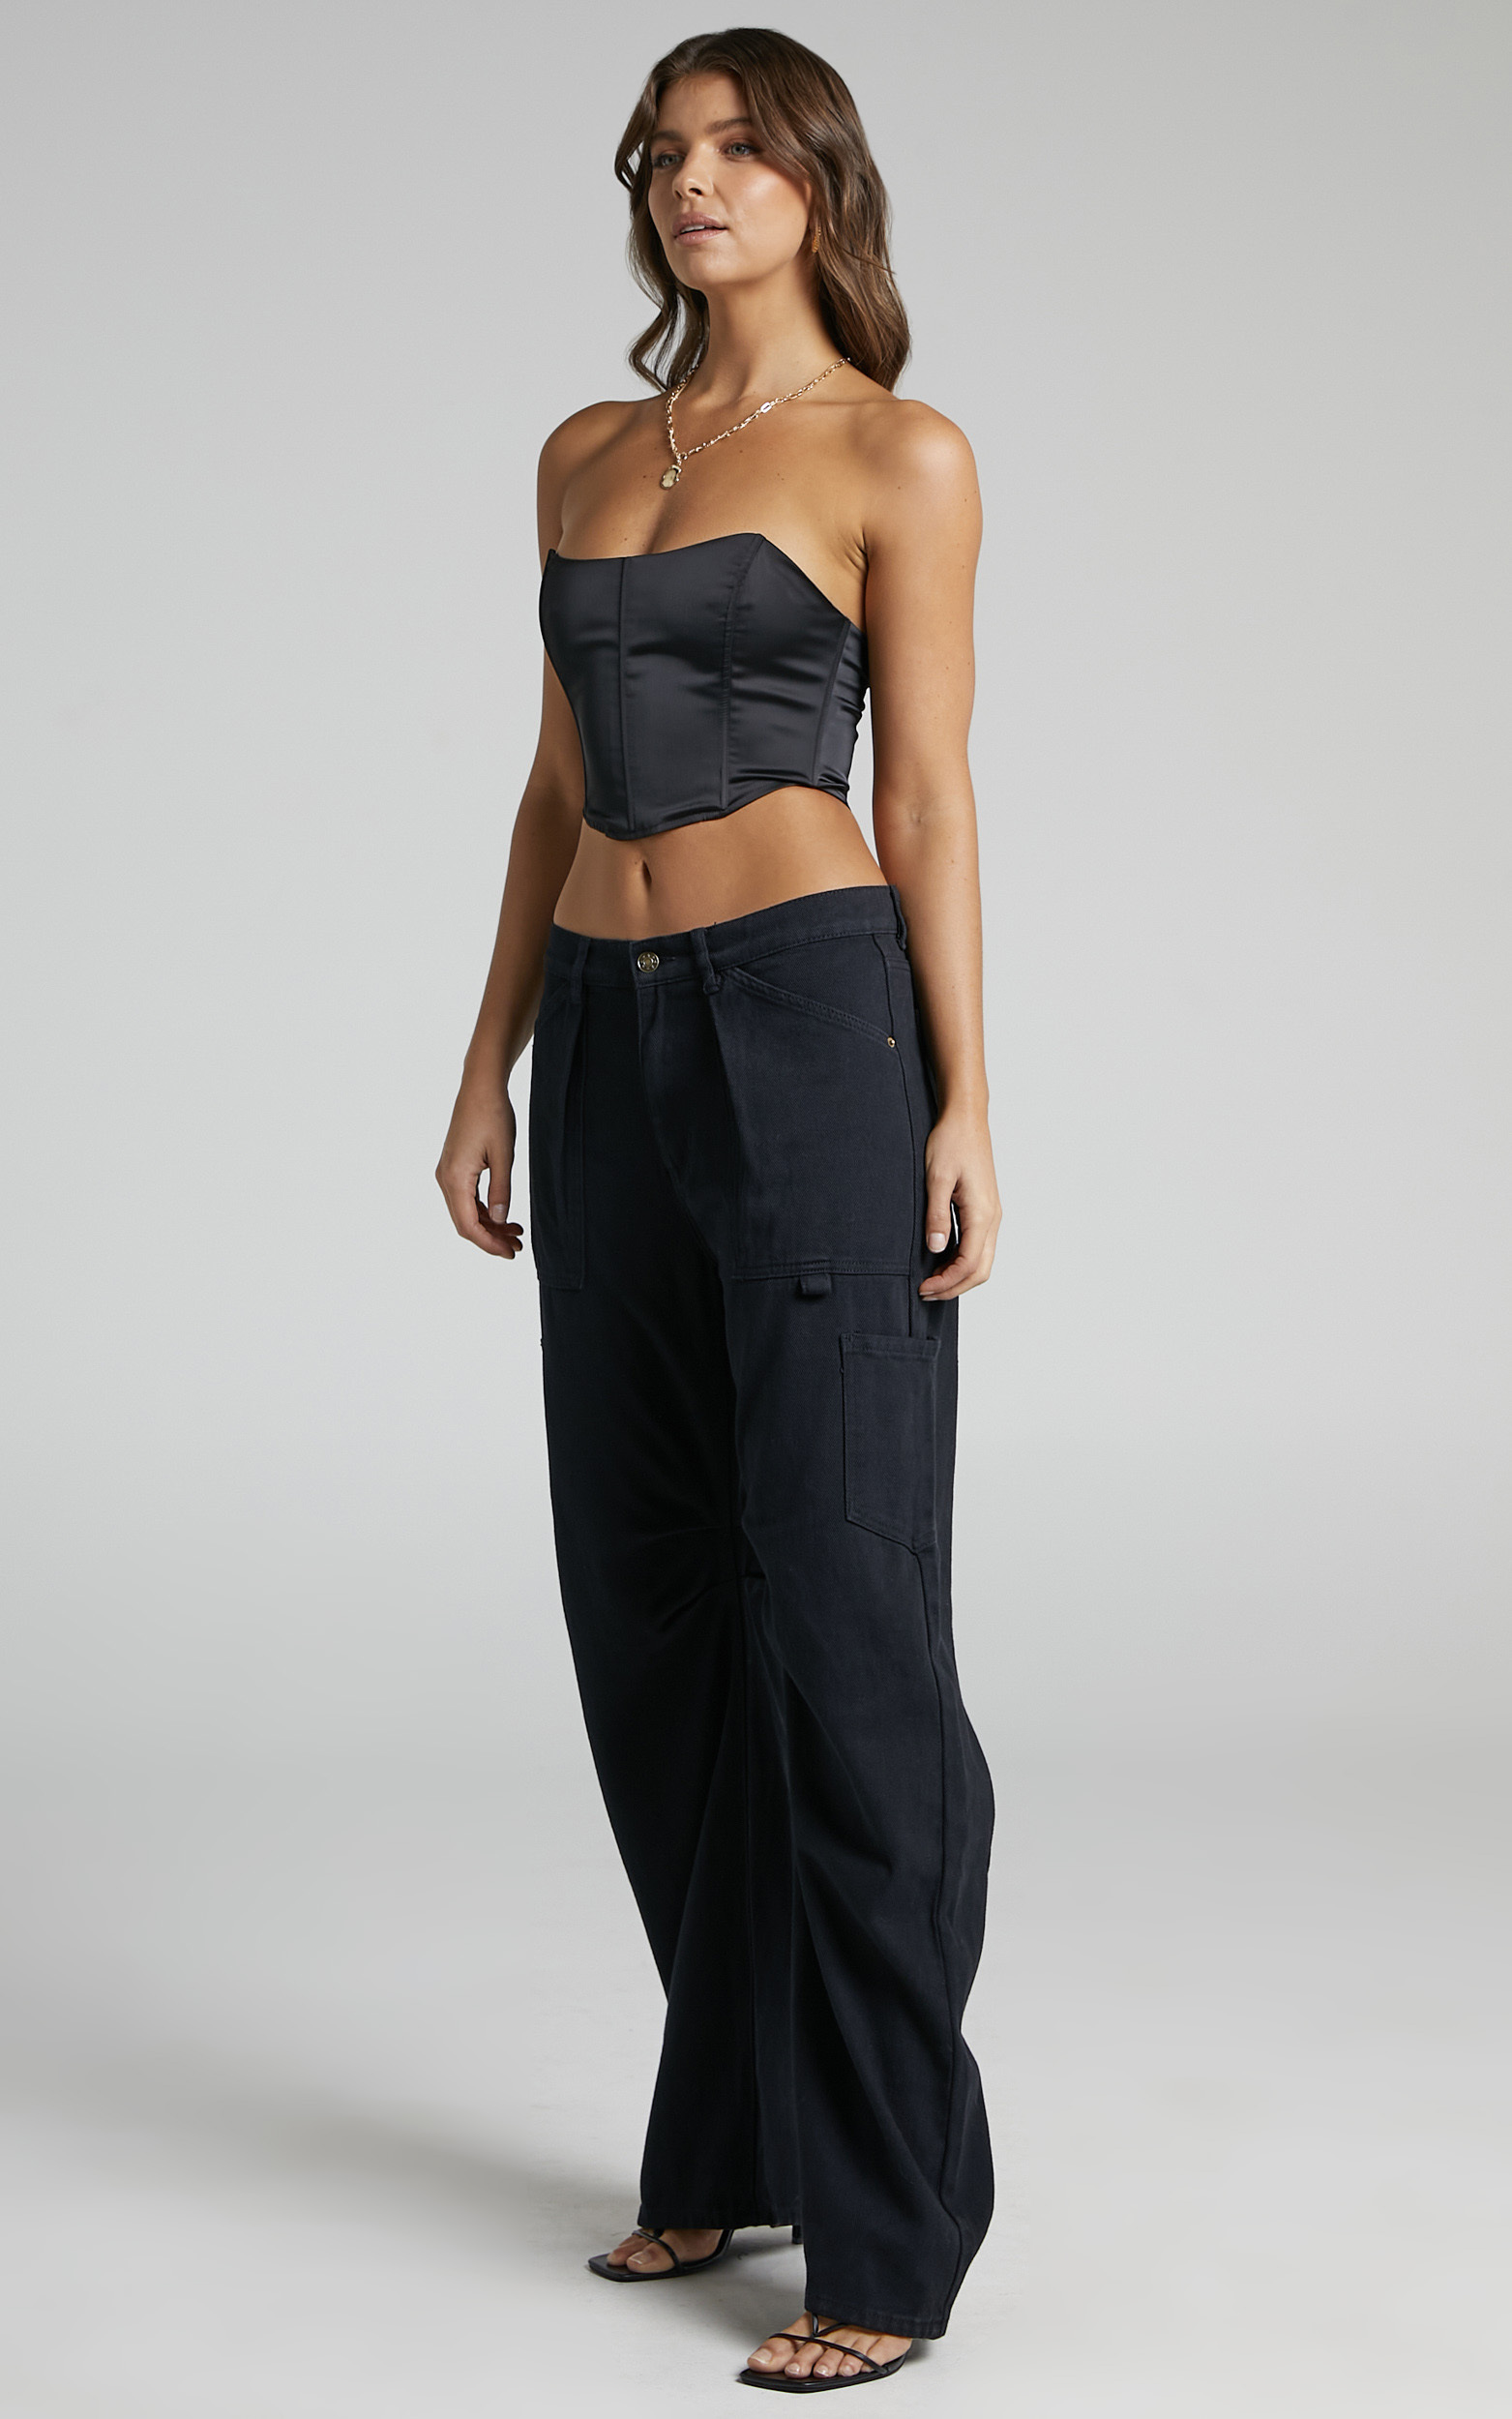 Lioness - Miami Vice Pants in Black - L, BLK1, hi-res image number null